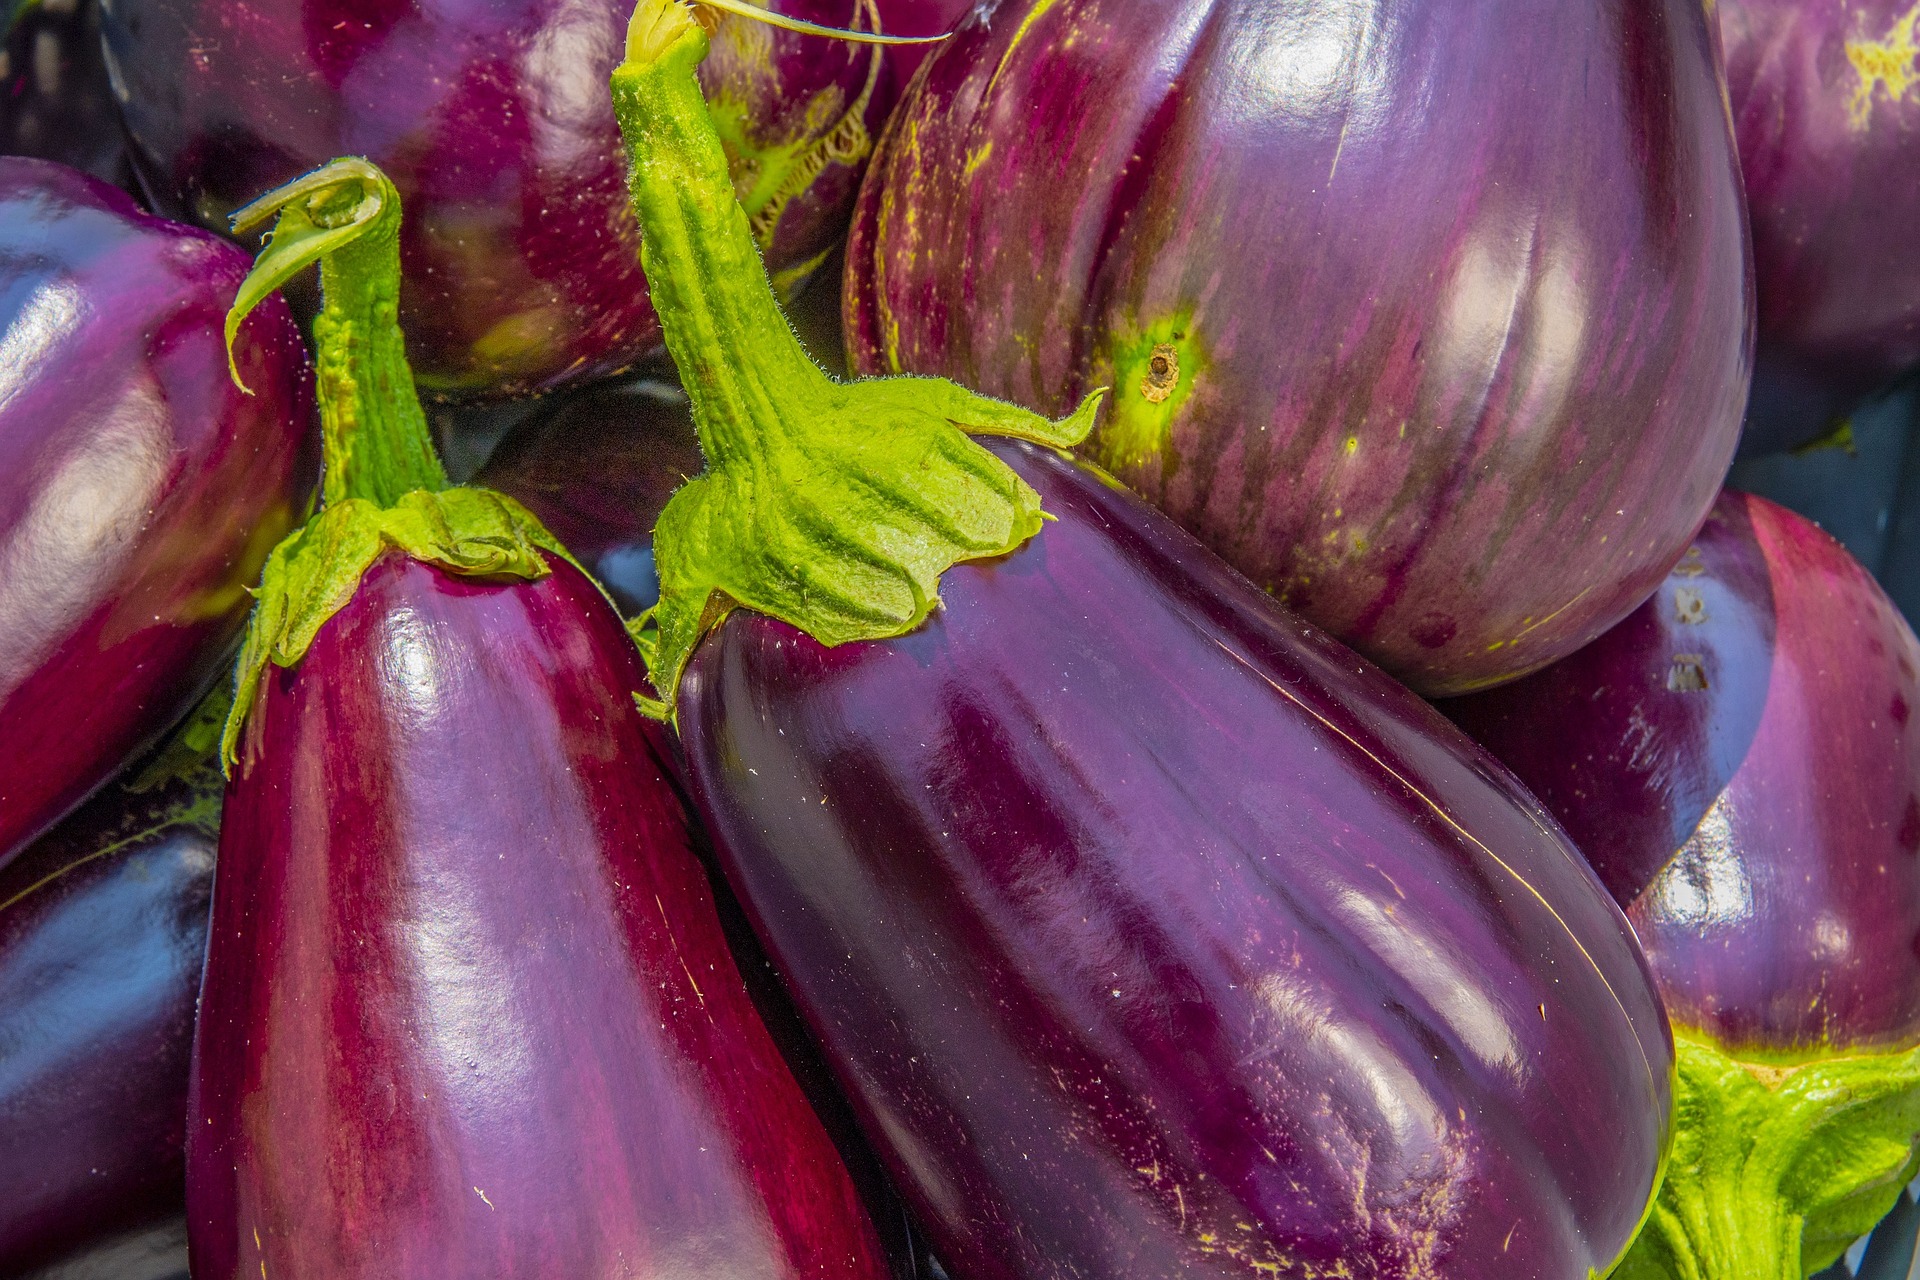 E is for eggplant